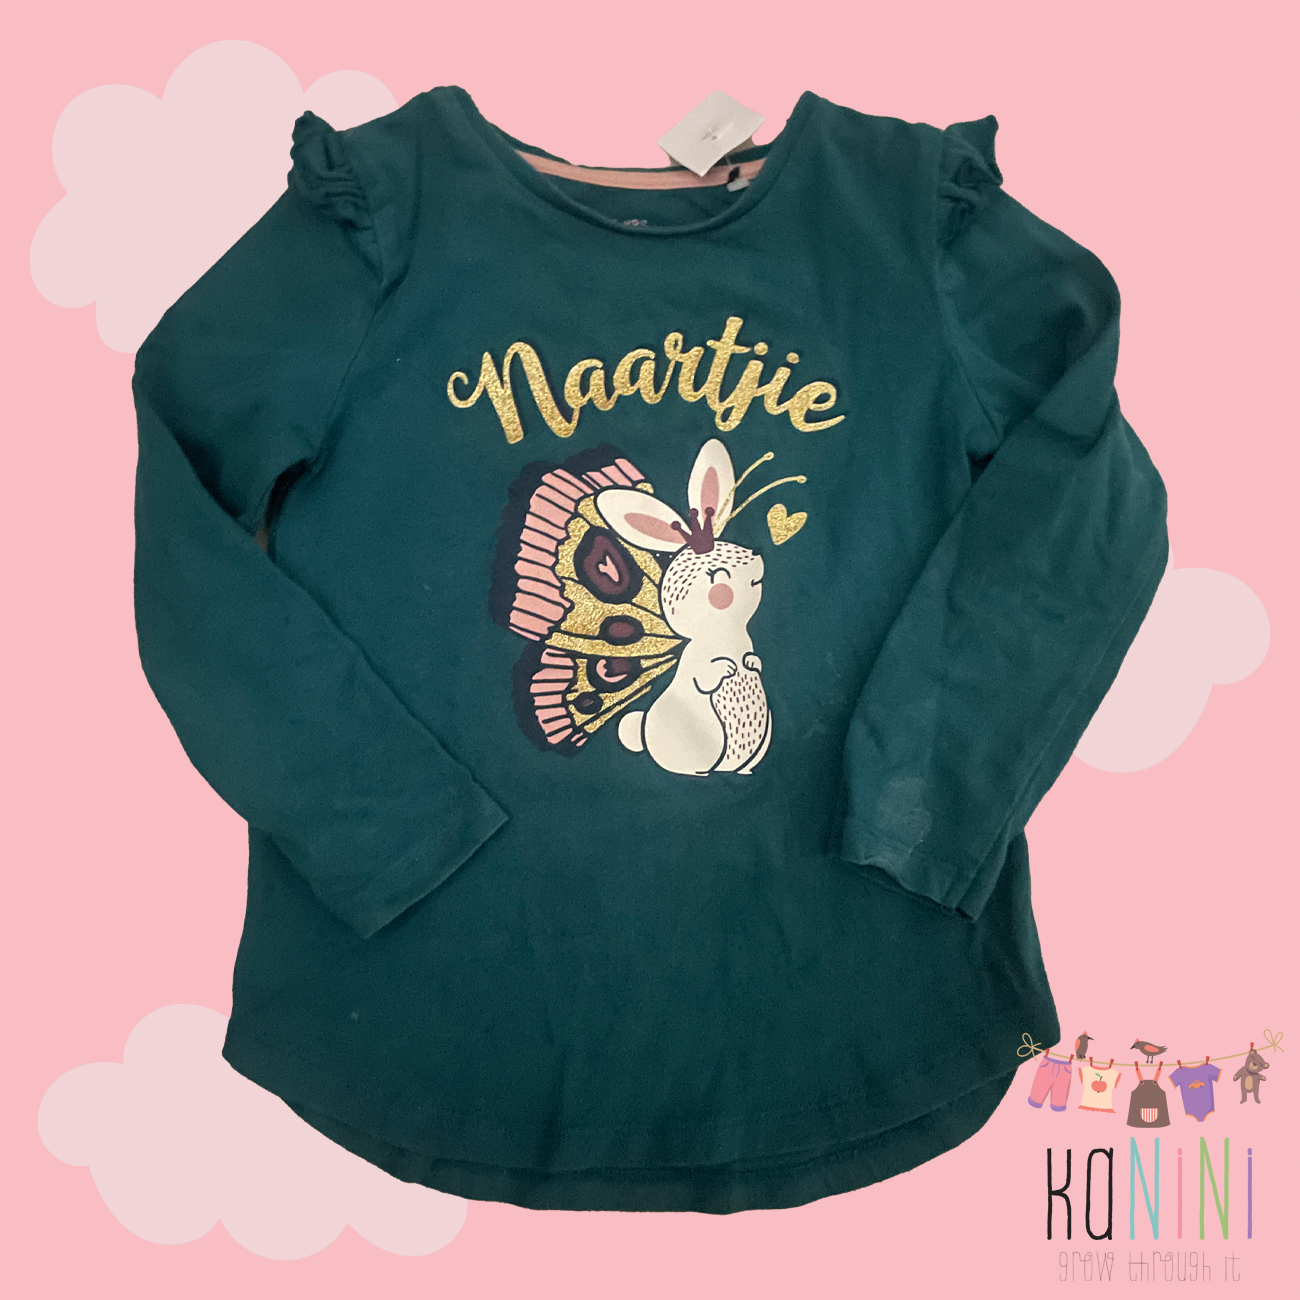 Featured image for “Naartjie 3 - 4 Years Girls Long Sleeve T-Shirt”